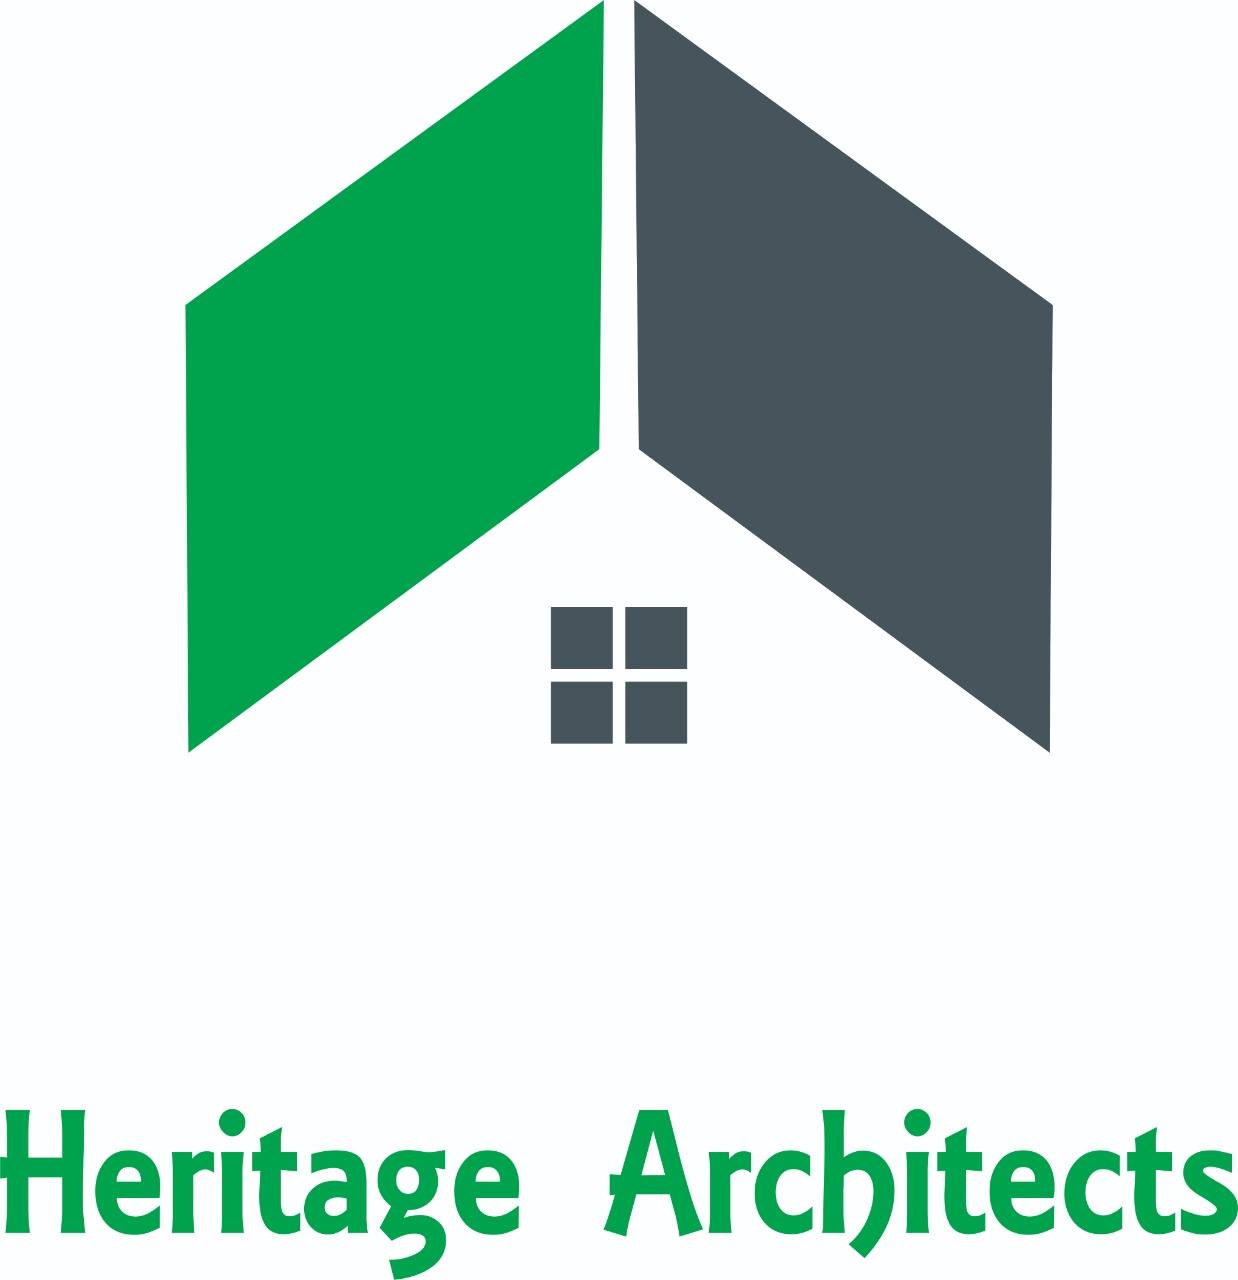 Heritage Architects|Architect|Professional Services